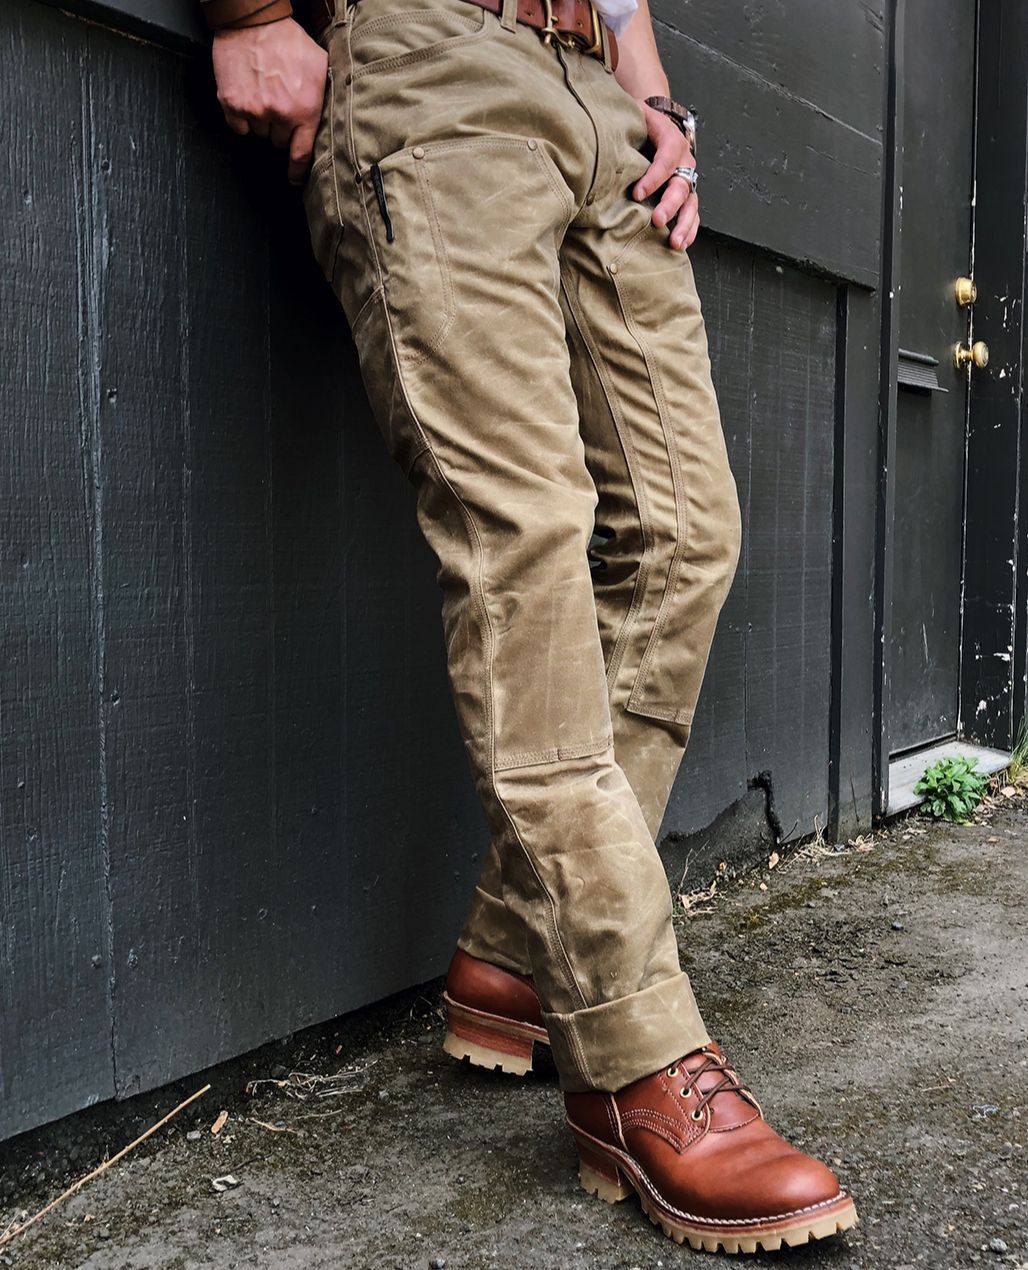 Red Clouds  The GN01 Waxed Canvas Work Pants in Black waxed canvas look  better with every wear eparrillacreates shot some really cool photos on  his farm featuring his worn in GN01